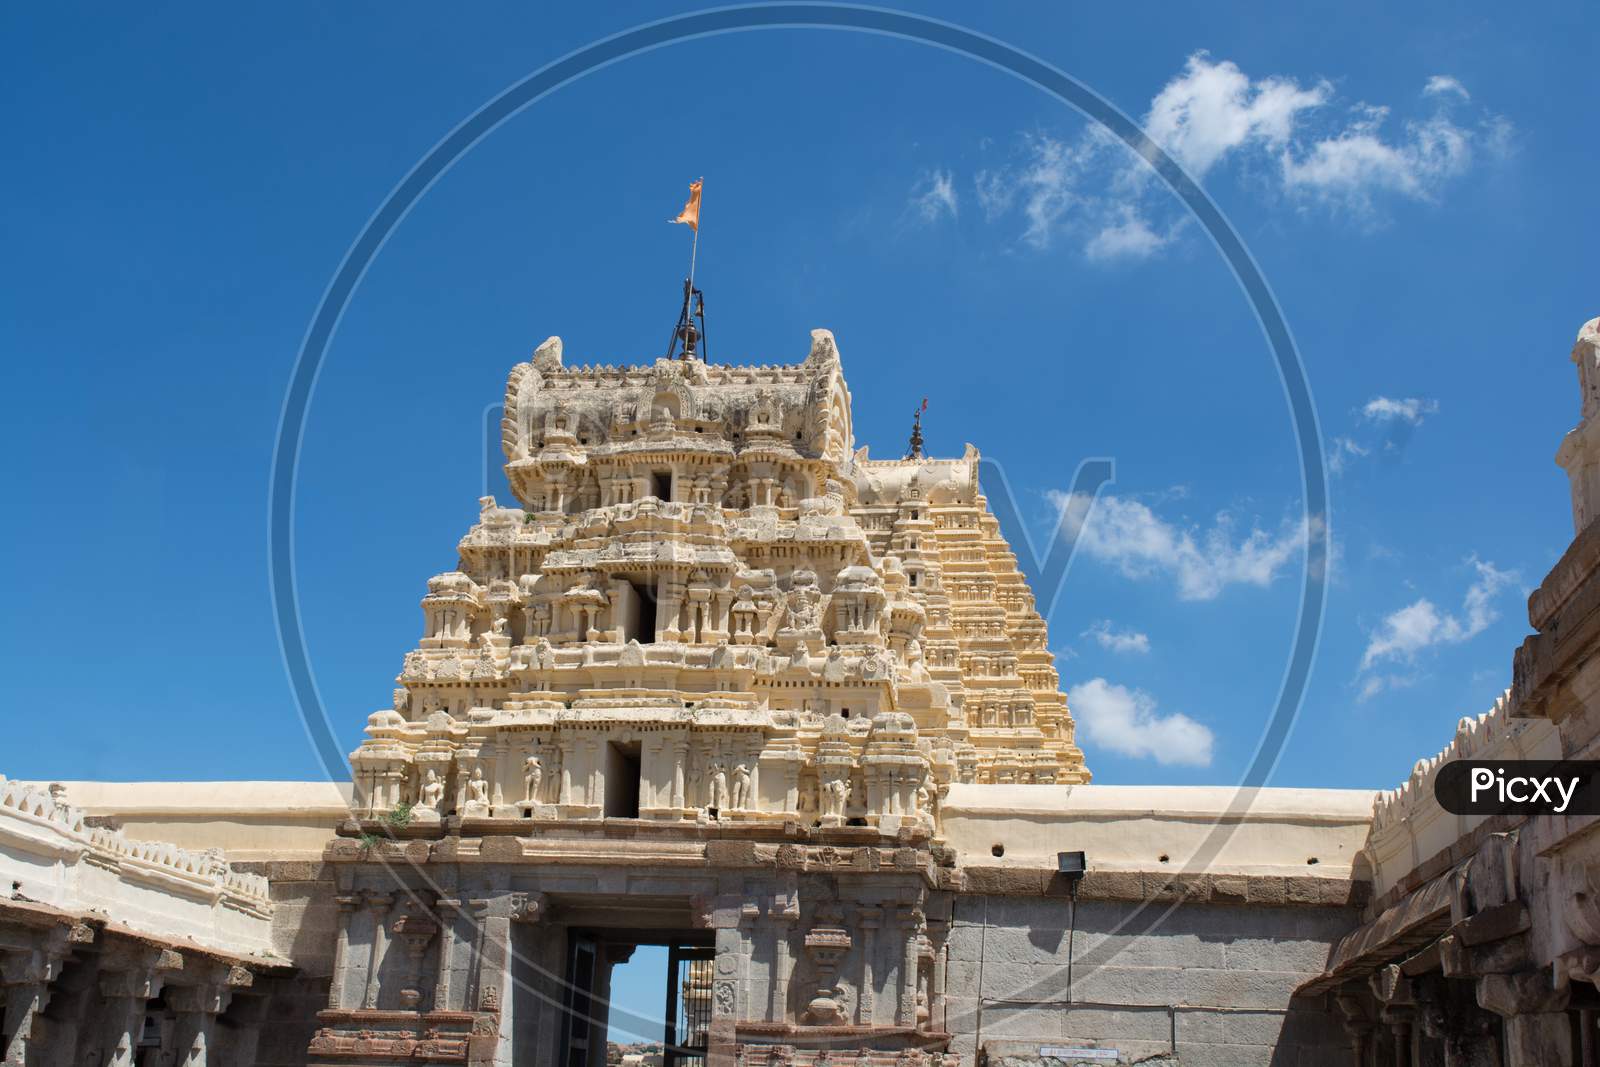 View Of The Temple Tower Of Virupaksha Temple At Hampi, India